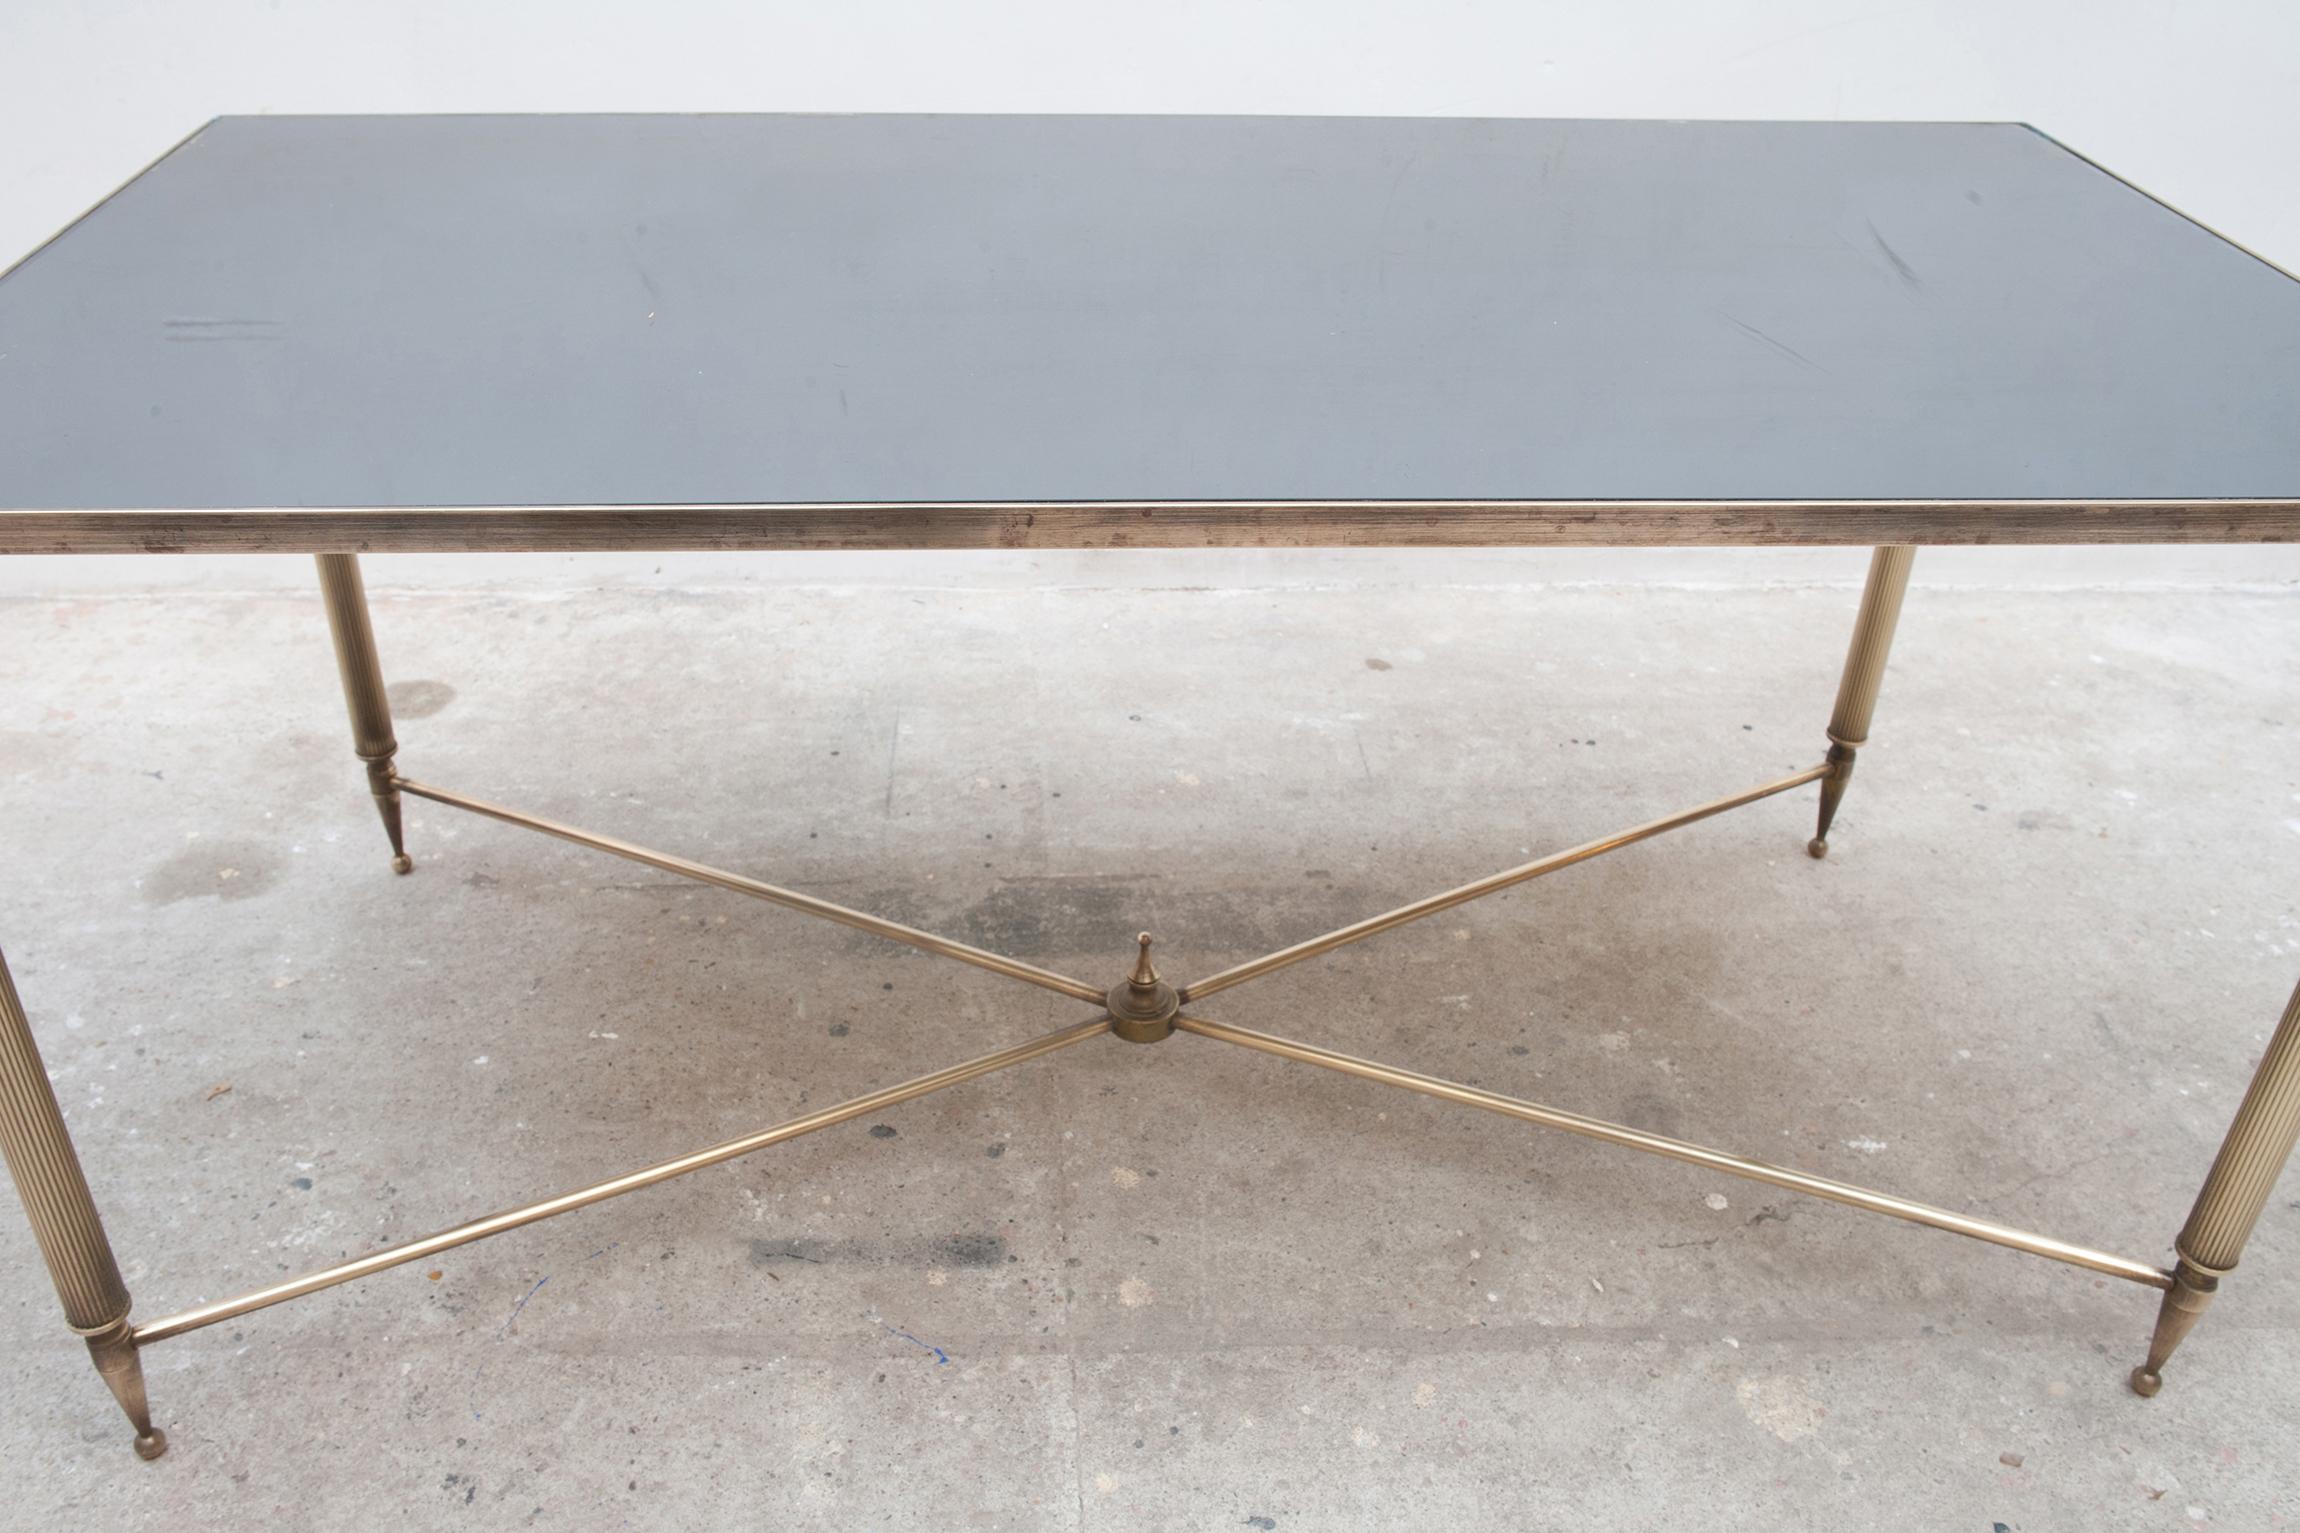 Neoclassical style rectangular brass coffee table by Maison Baguès. The brass legs are joined by a brass stretcher. 

An elegant and timeless piece to go with any style decor, modern, midcentury or traditional.